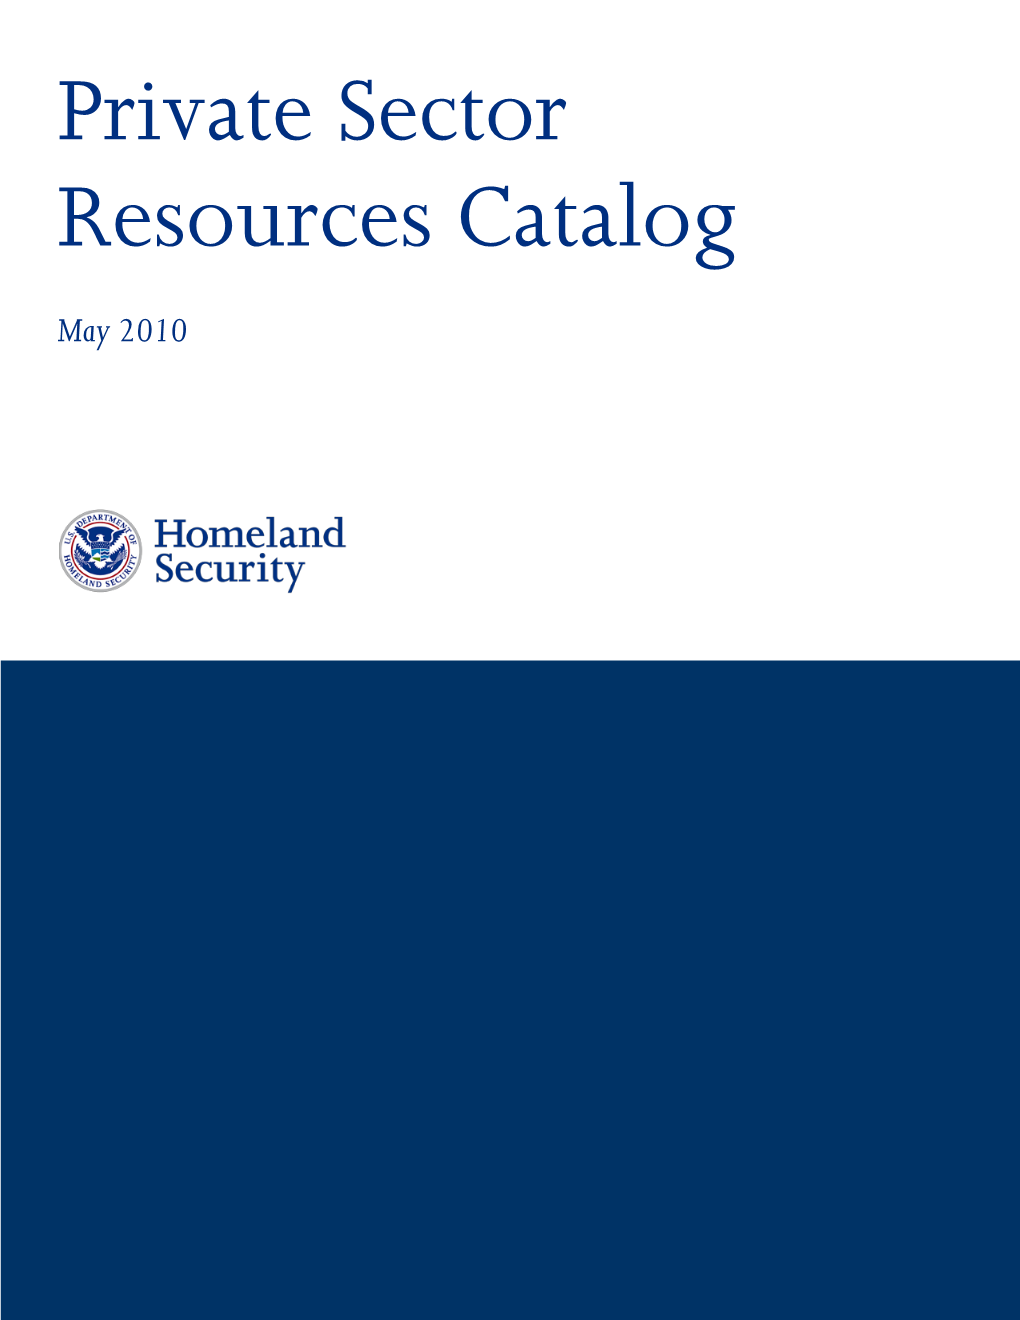 DHS Private Sector Resources Catalog